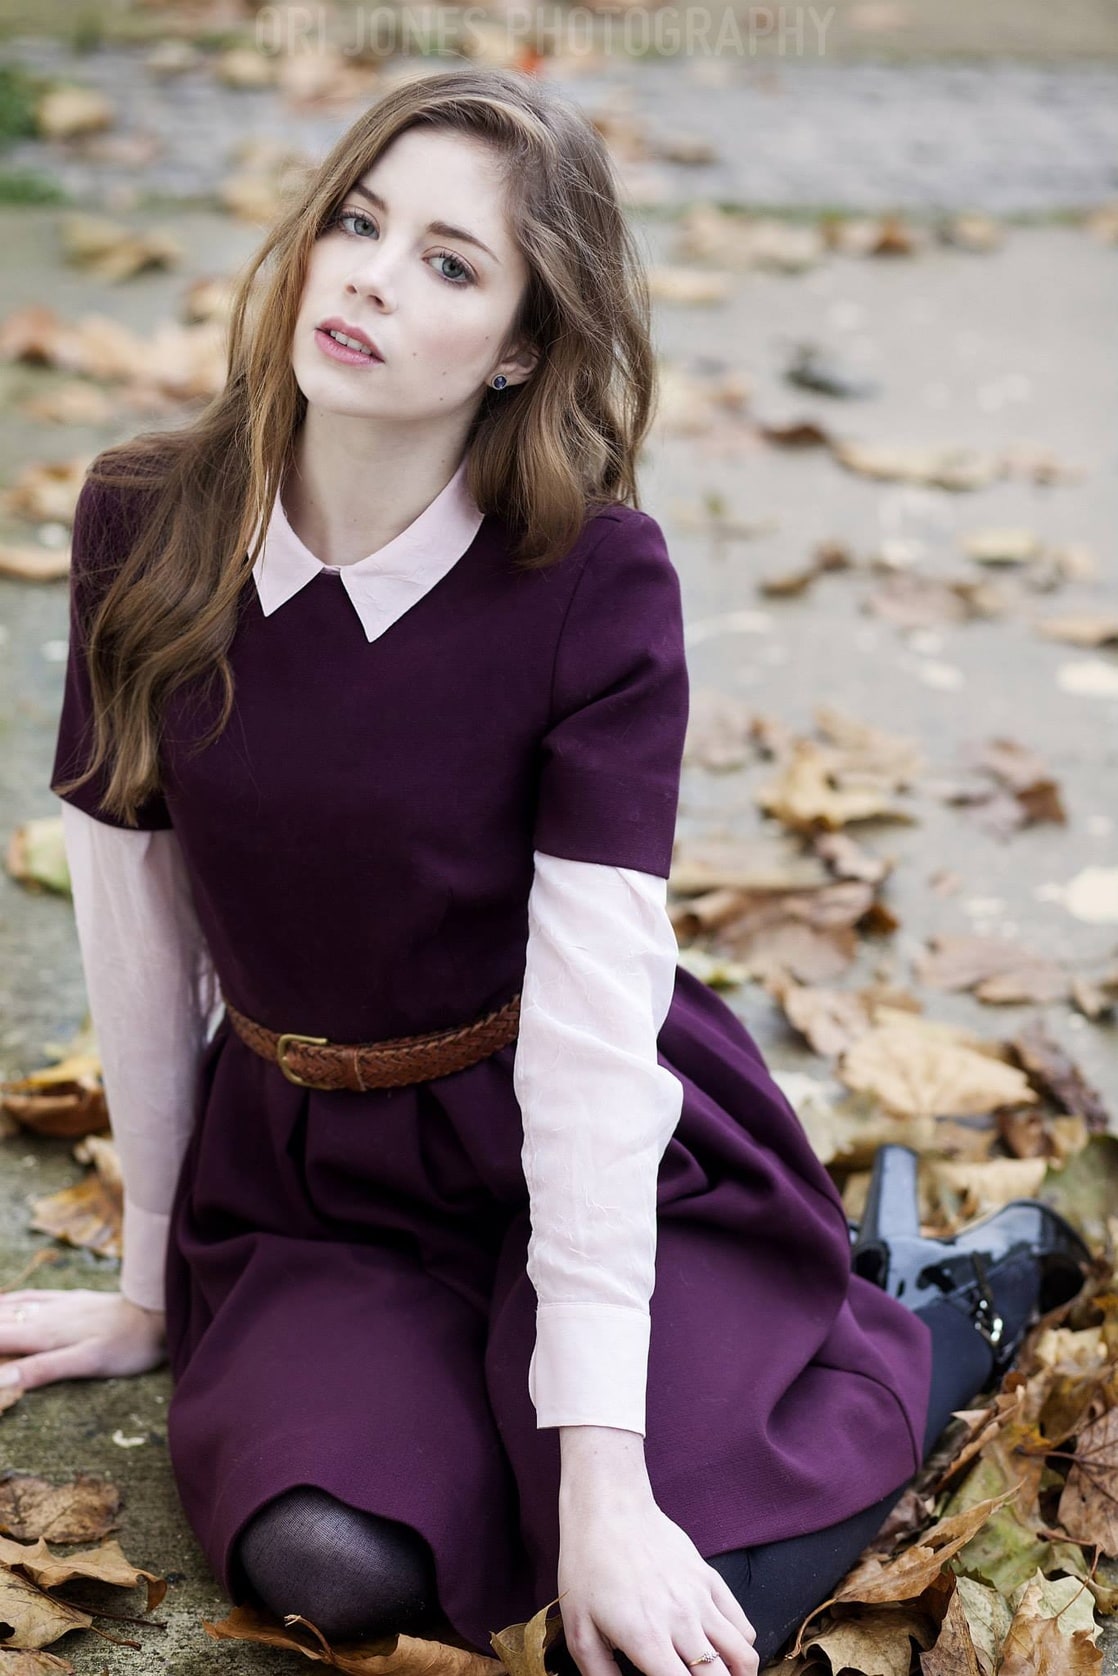 Charlotte Hope picture